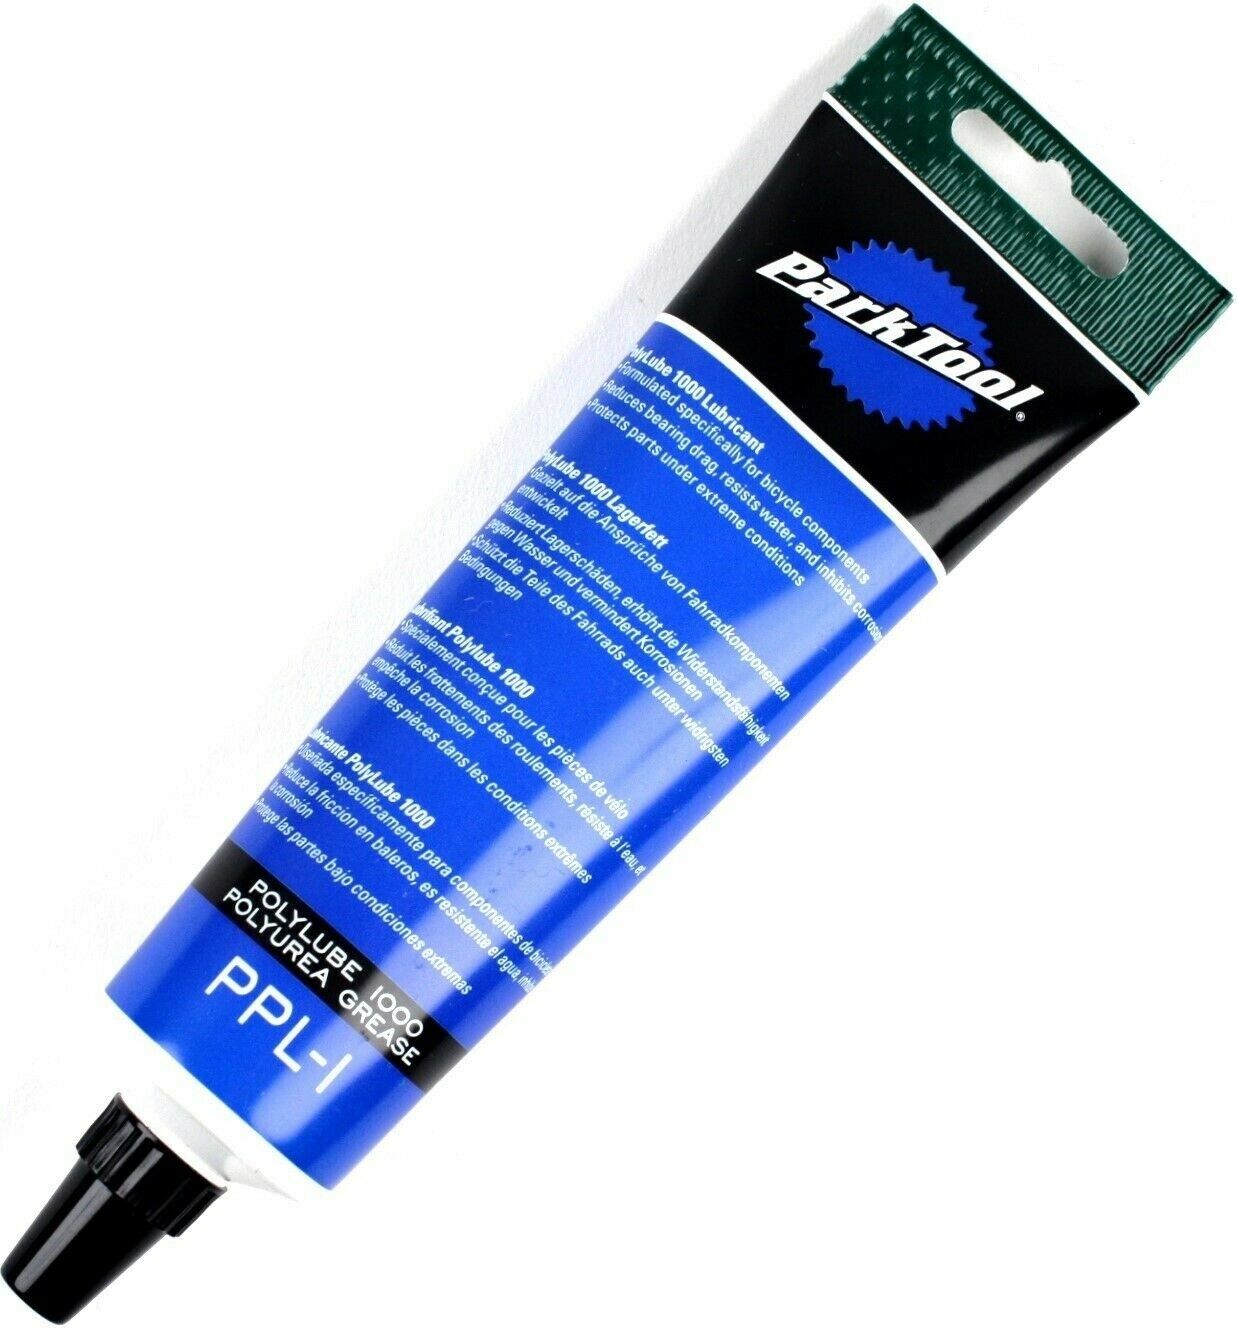 Park Tool Ppl-1 Polylube 1000 4oz Synthetic Grease Lube Bike Bicycle Mtb Road